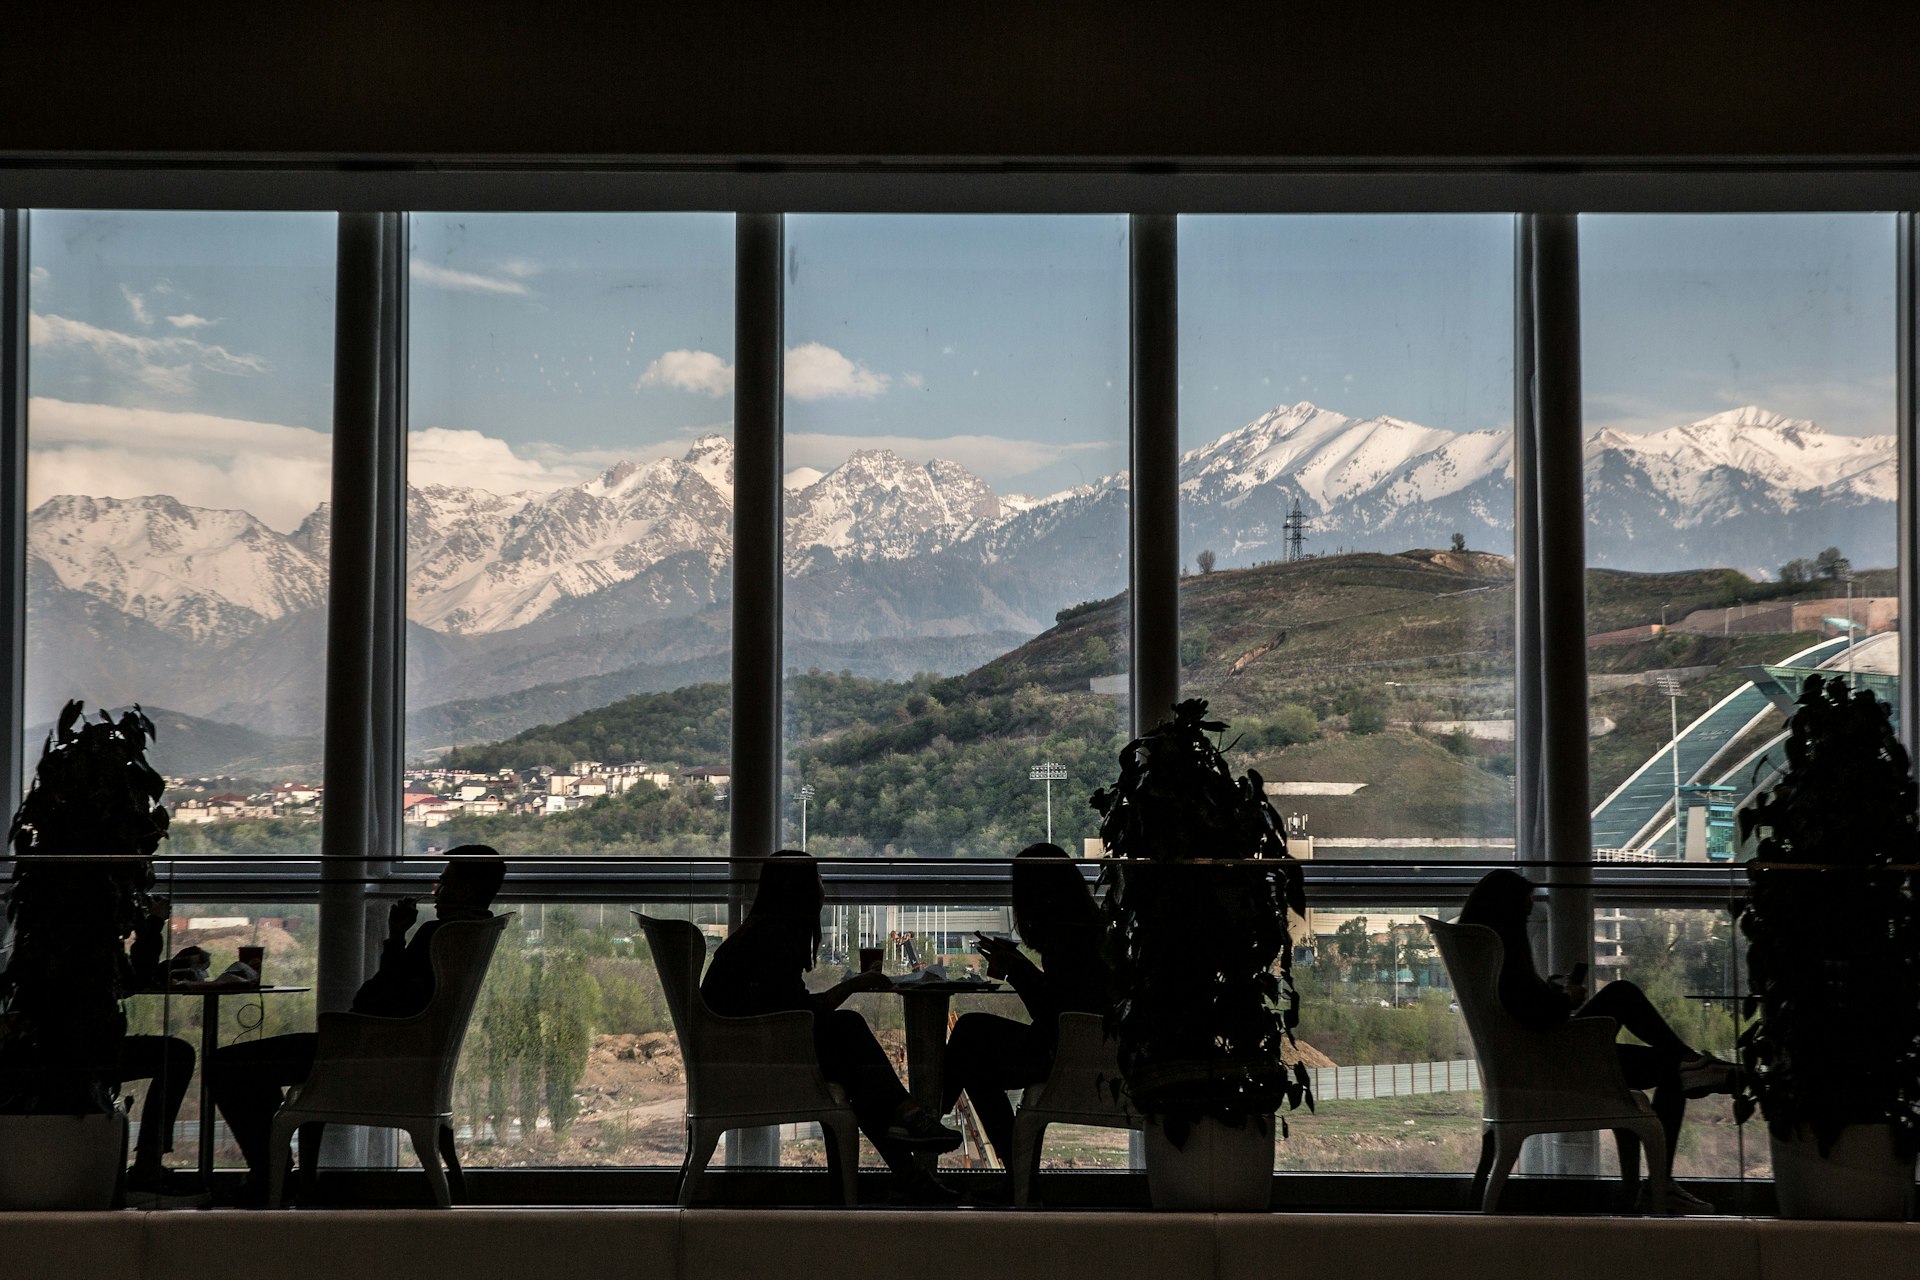 Customers are silhouetted as they dine in a restaurant at the Esentai Mall in Almaty, Kazakhstan. Through the wall-length windows, large mountains are visible.